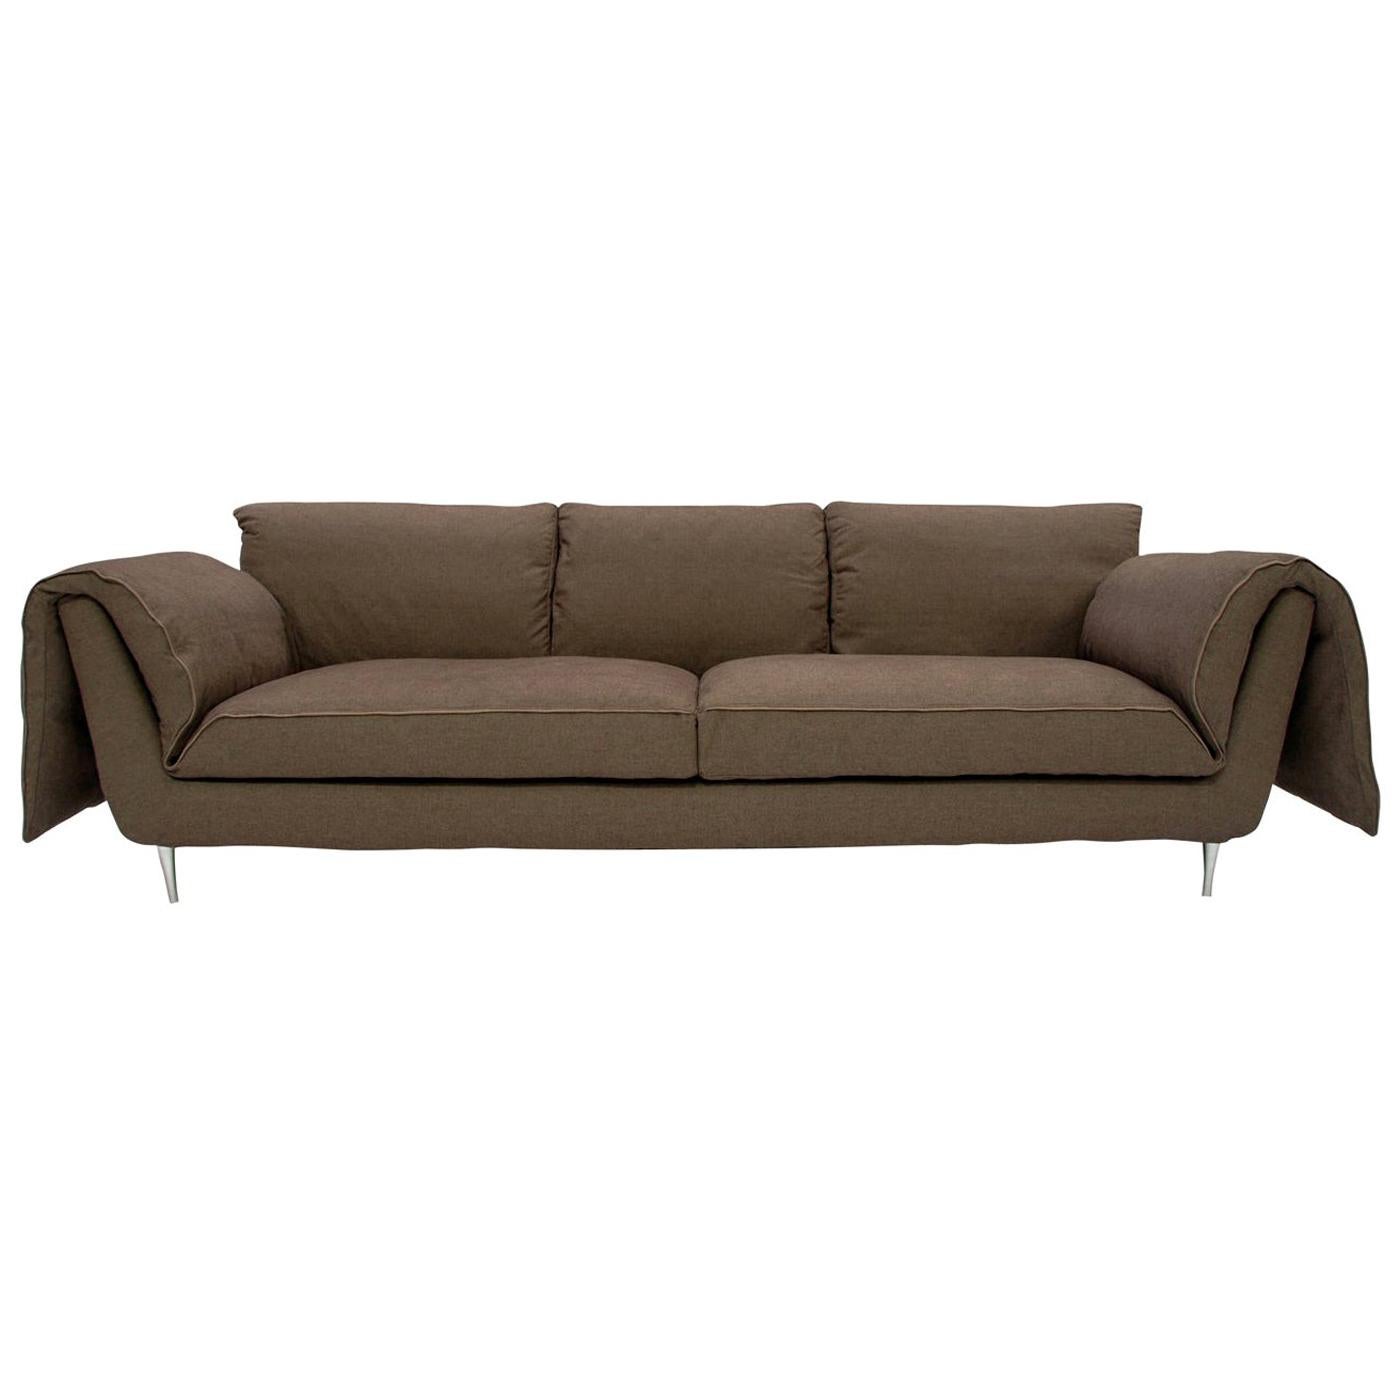 Casquet Sofa by ddpstudio For Sale